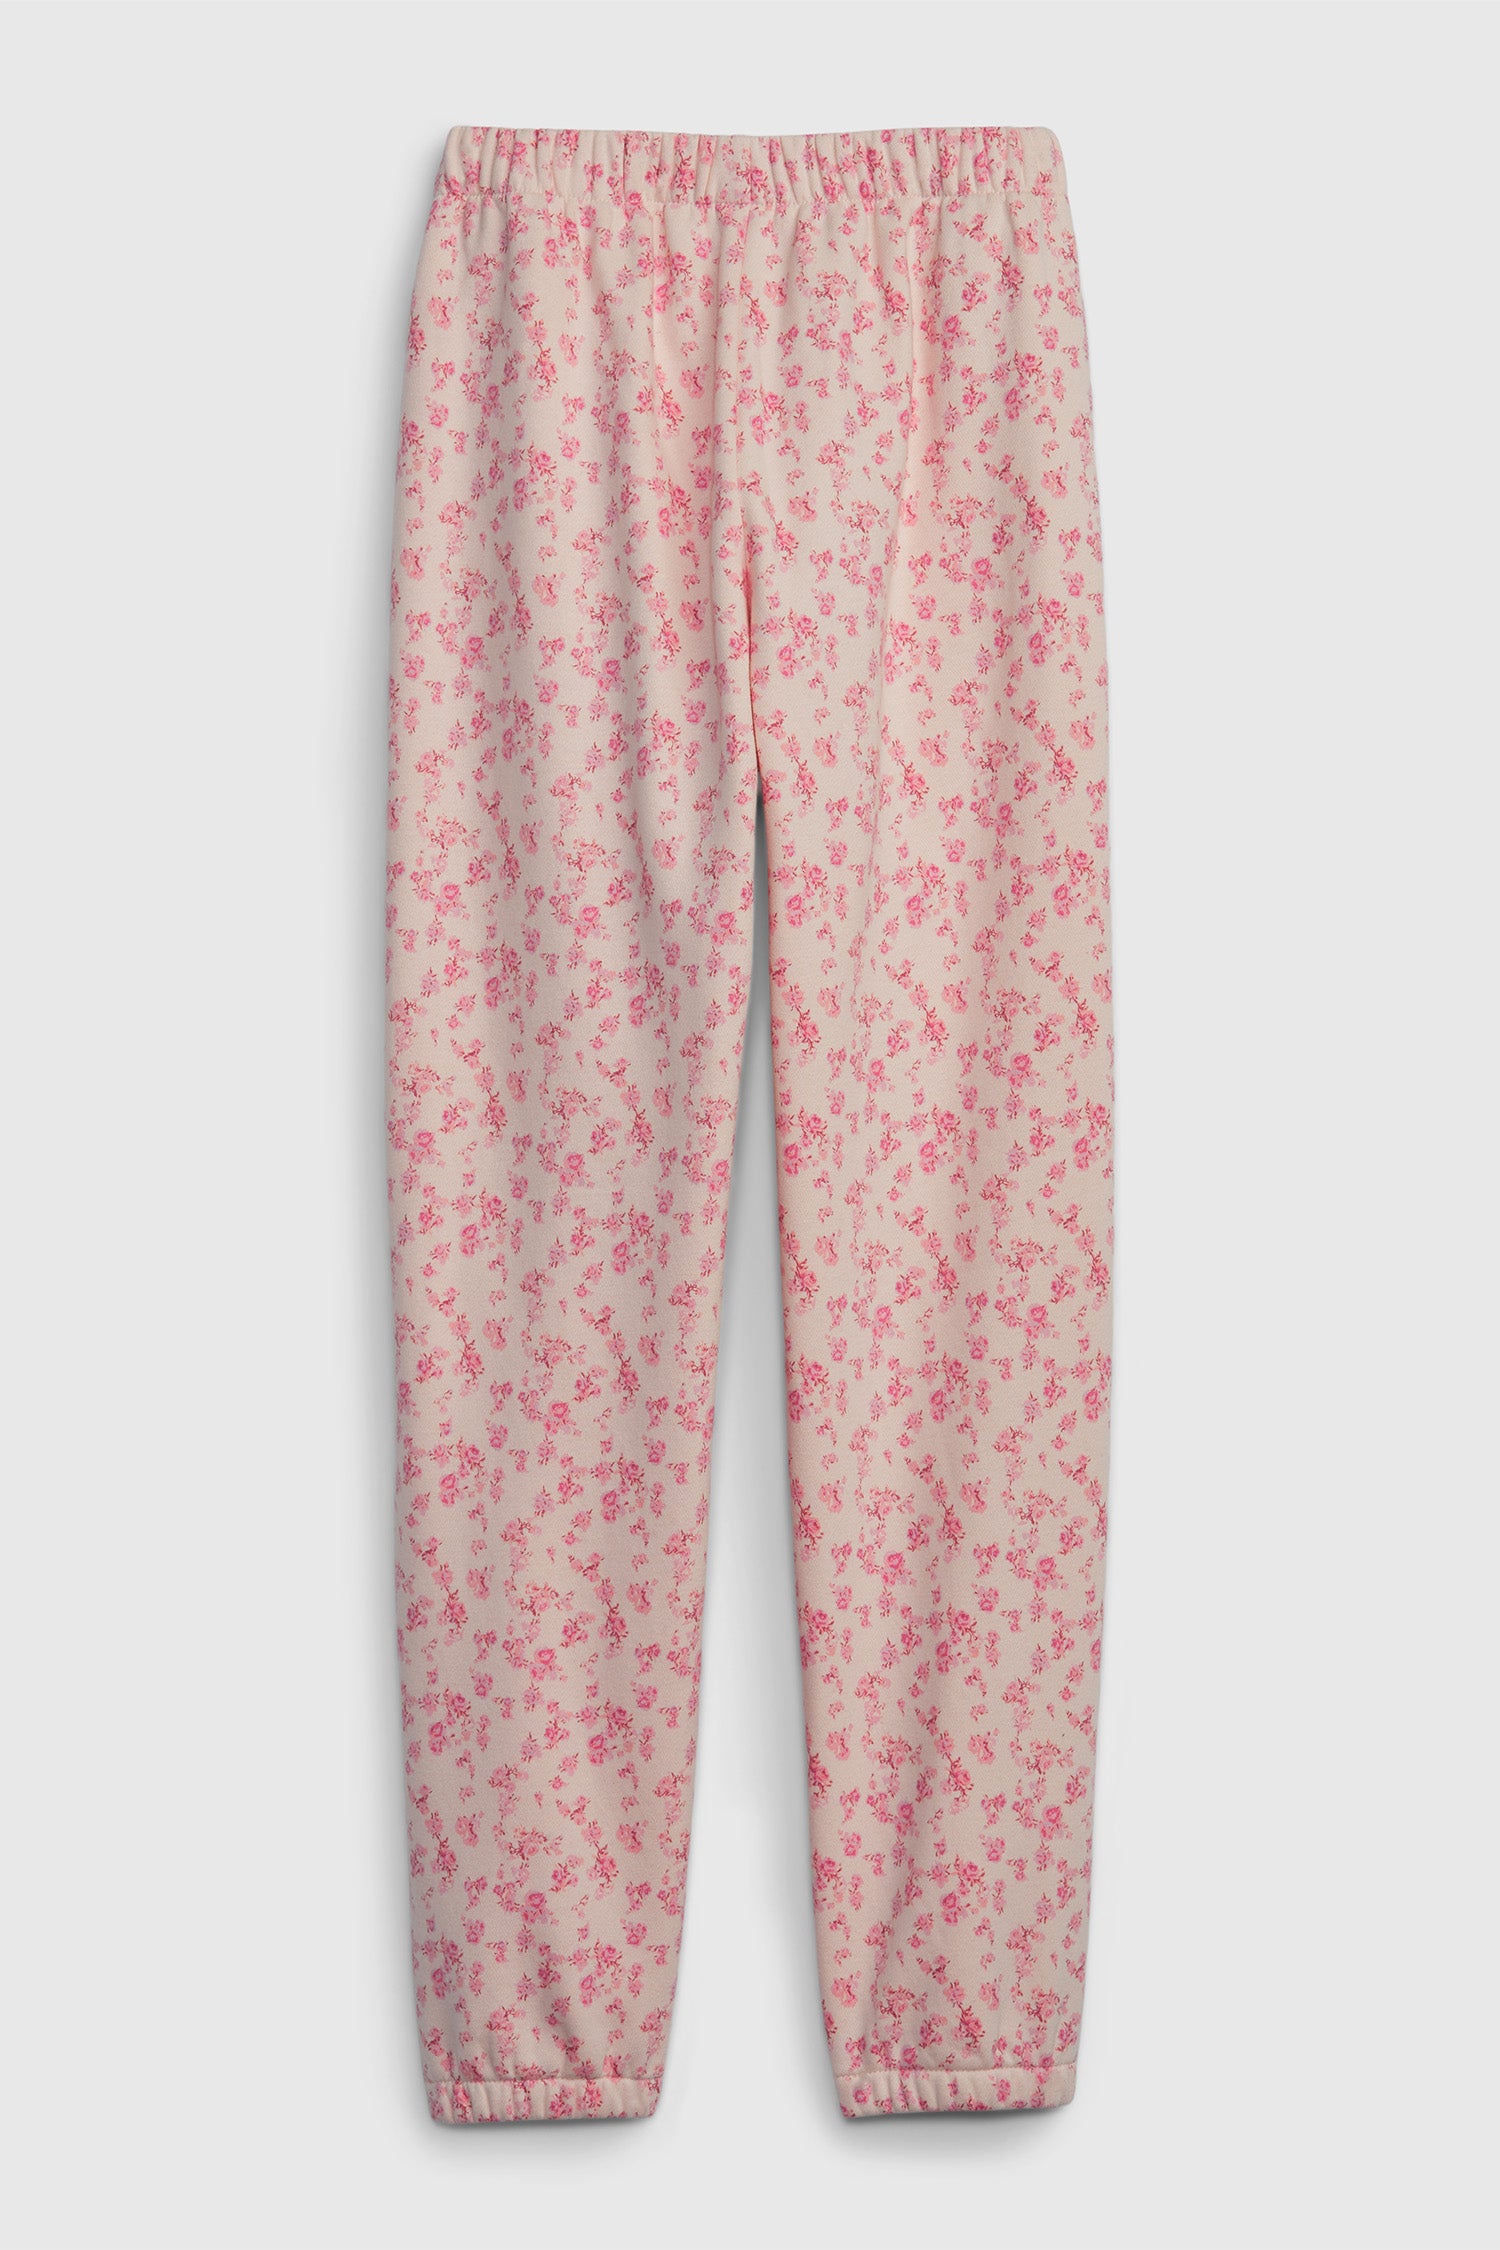 Gucci Kids Fruity Floral Jogging Trousers